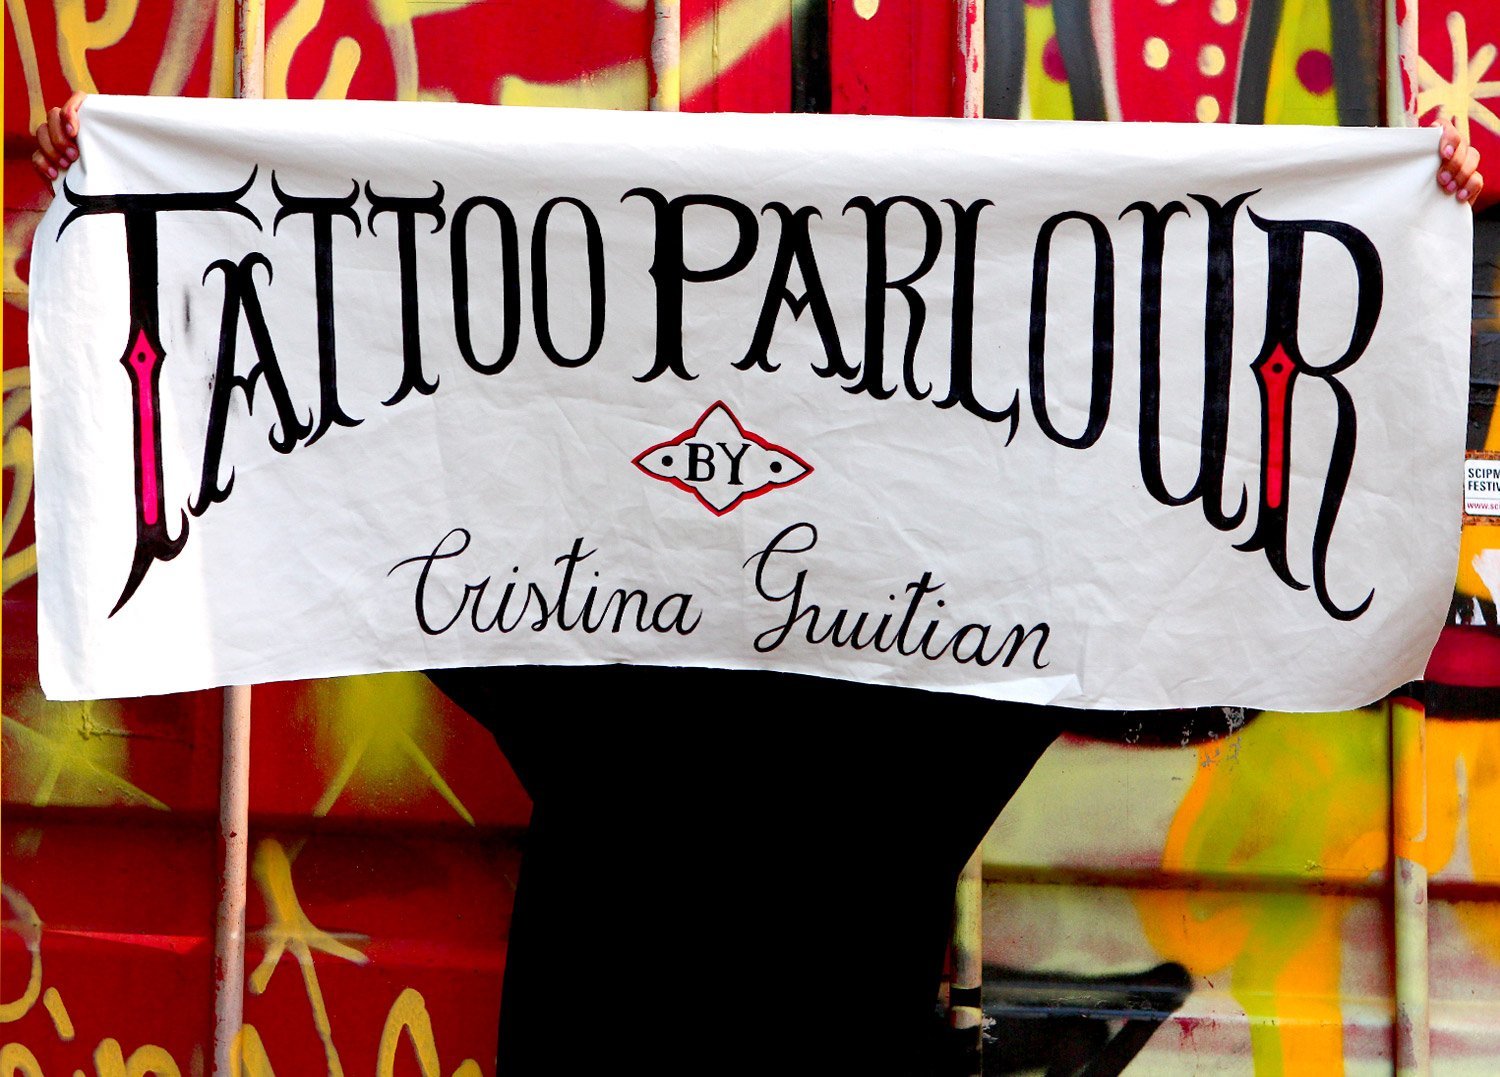 Tattoo Parlour for the Friday Late event at the V&A